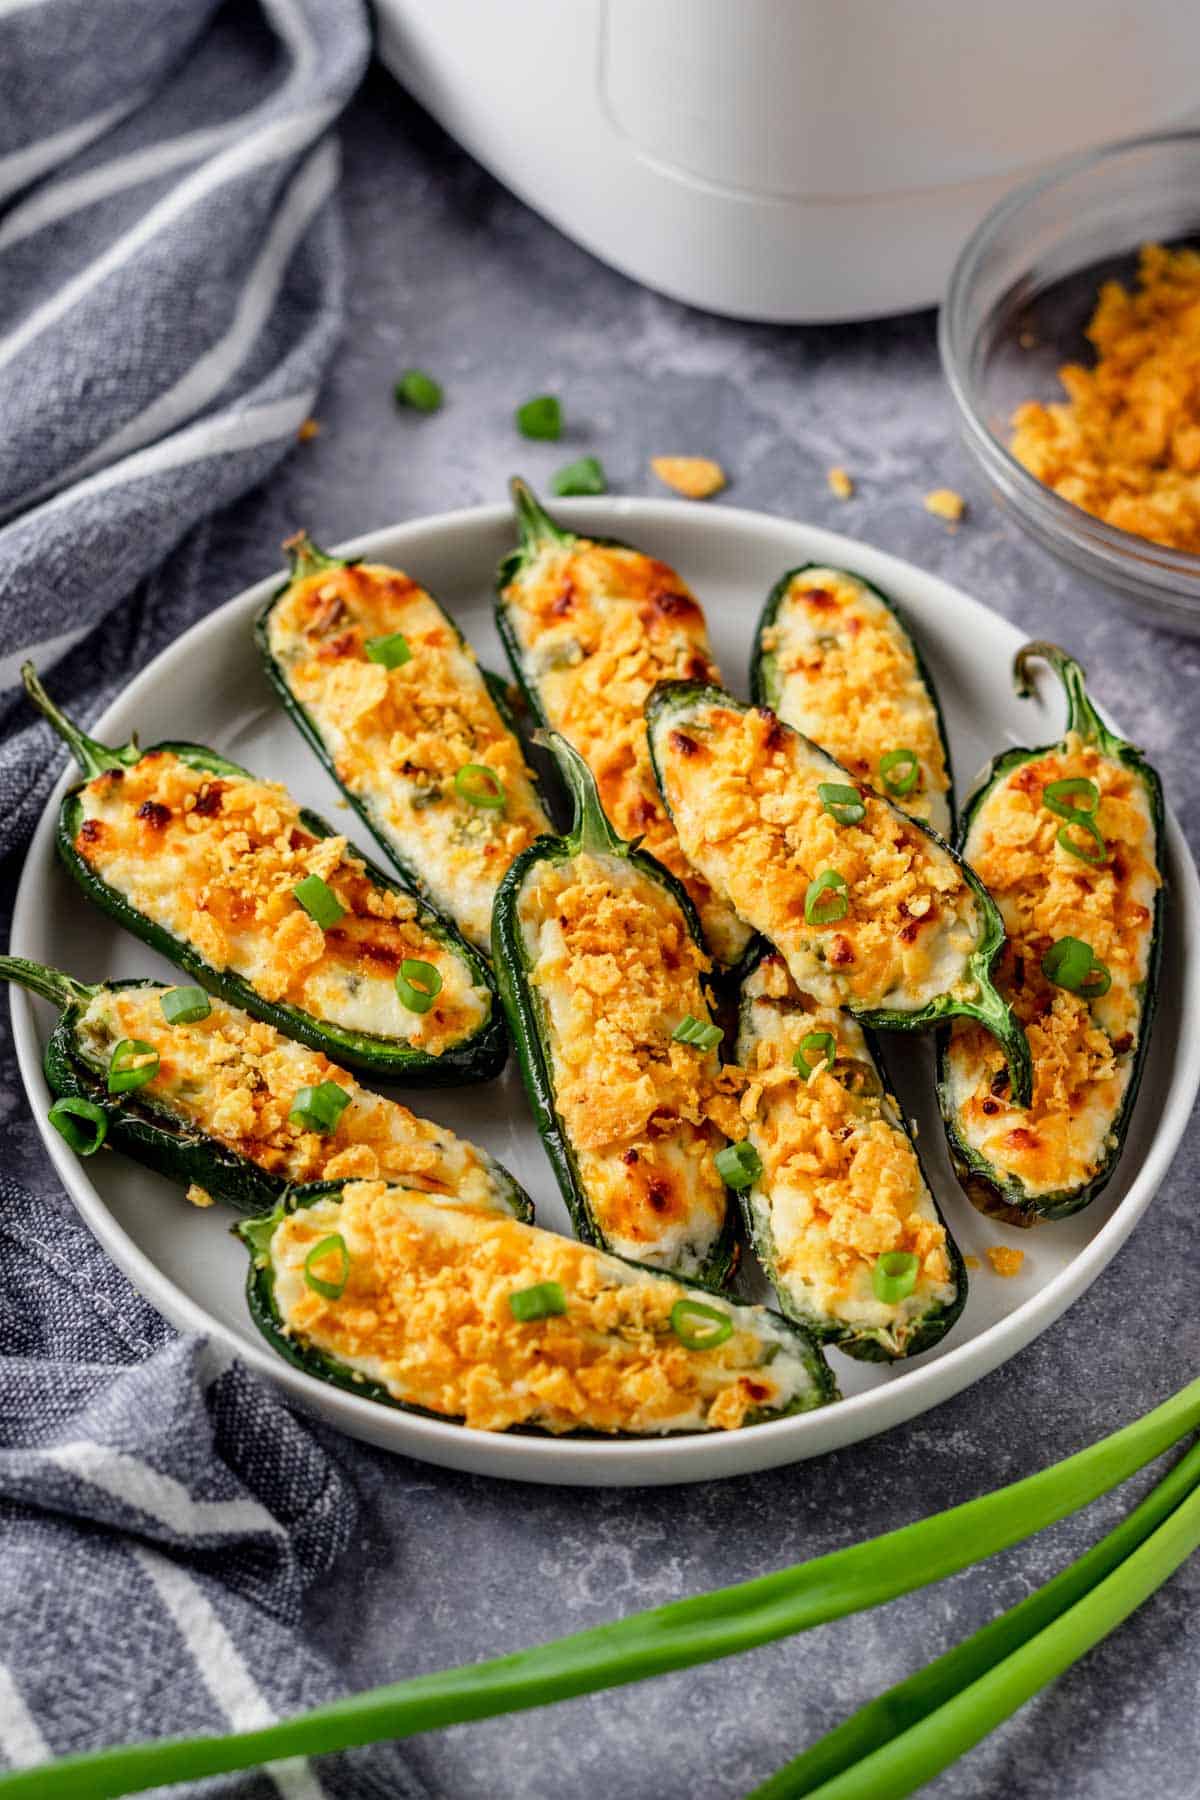 Air Fryer Jalapeno Poppers No Bacon